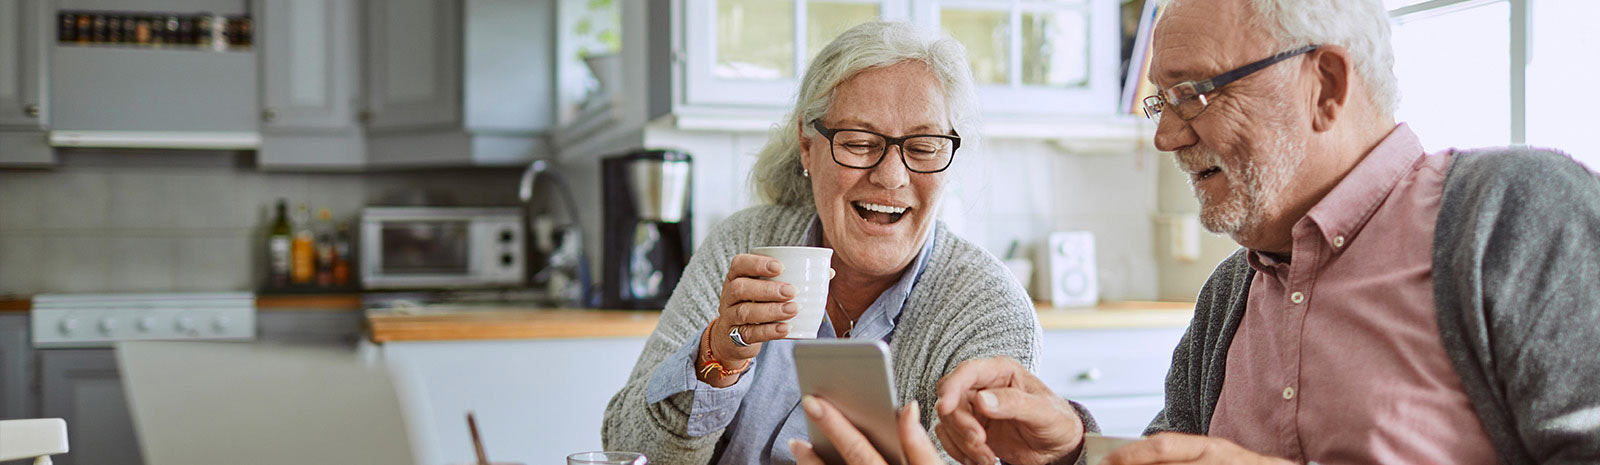 Retired couple having coffee looking at phone.